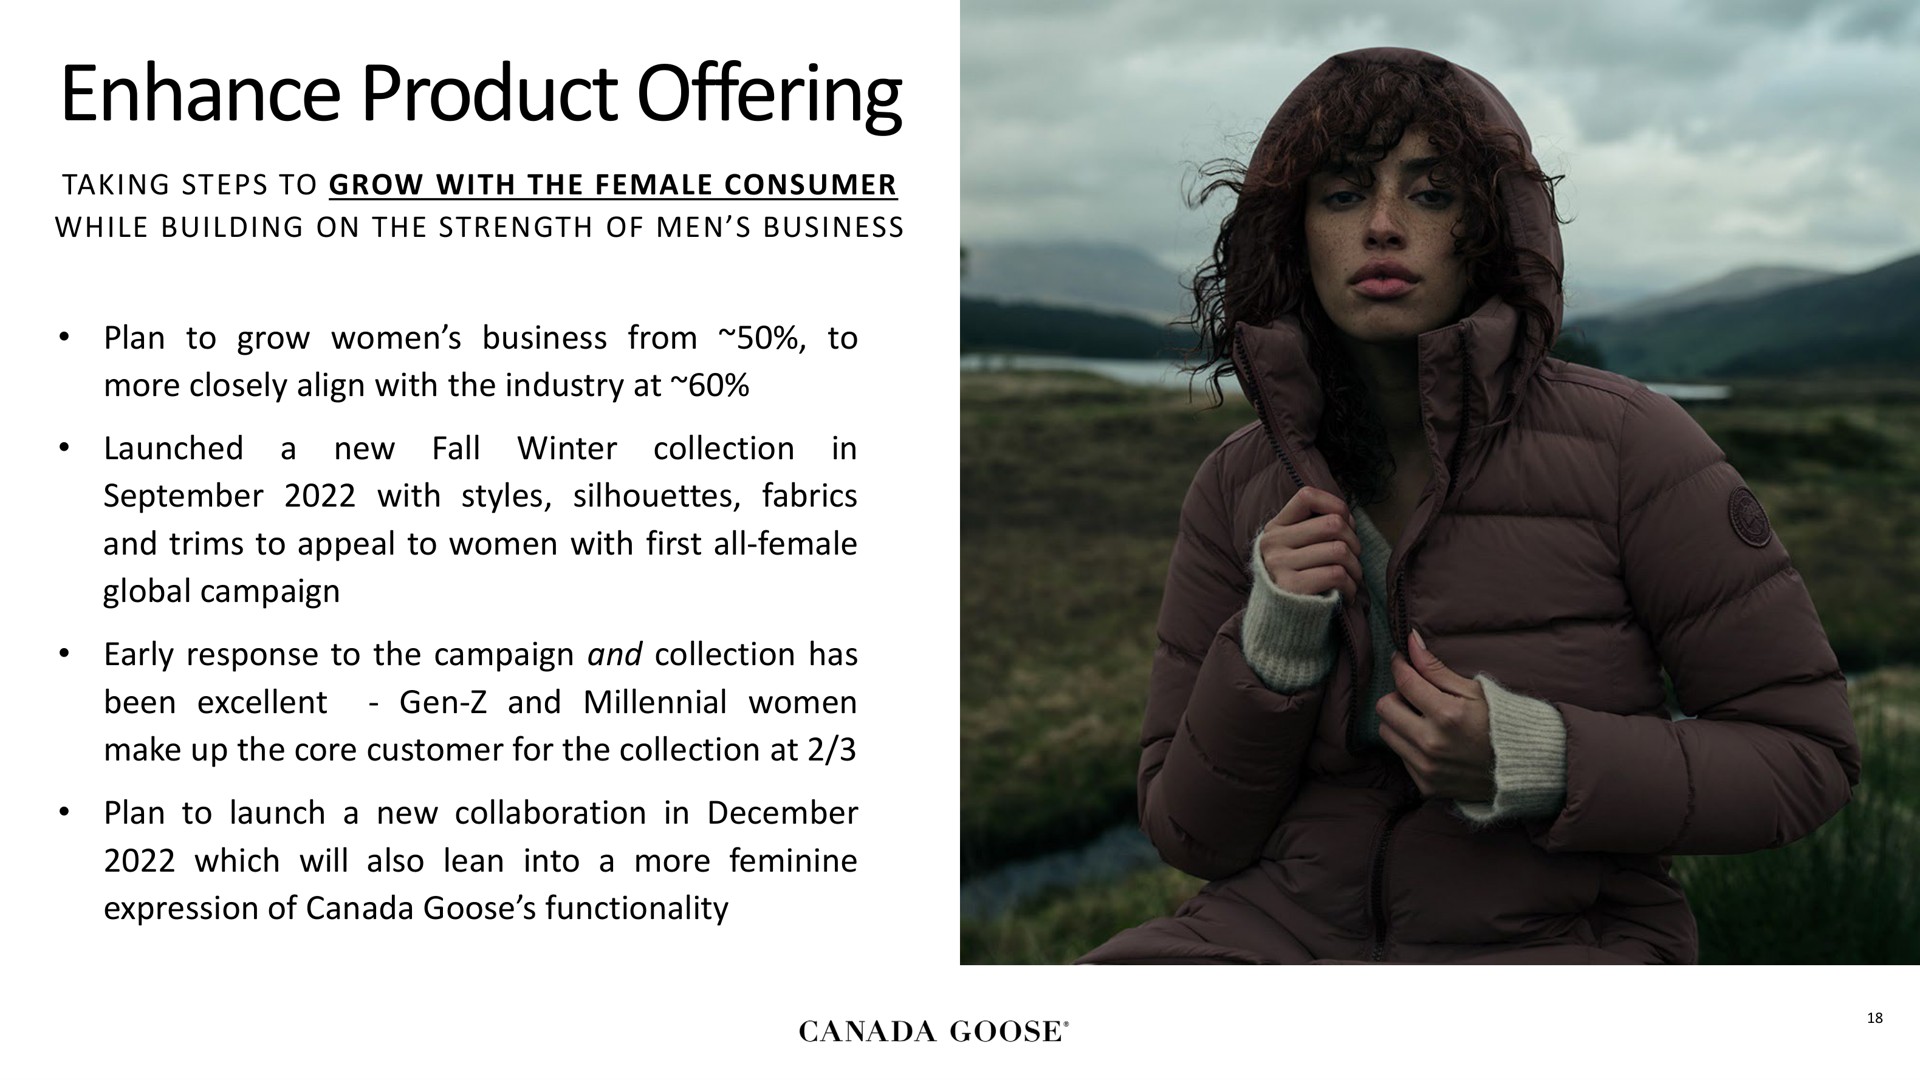 enhance product offering | Canada Goose